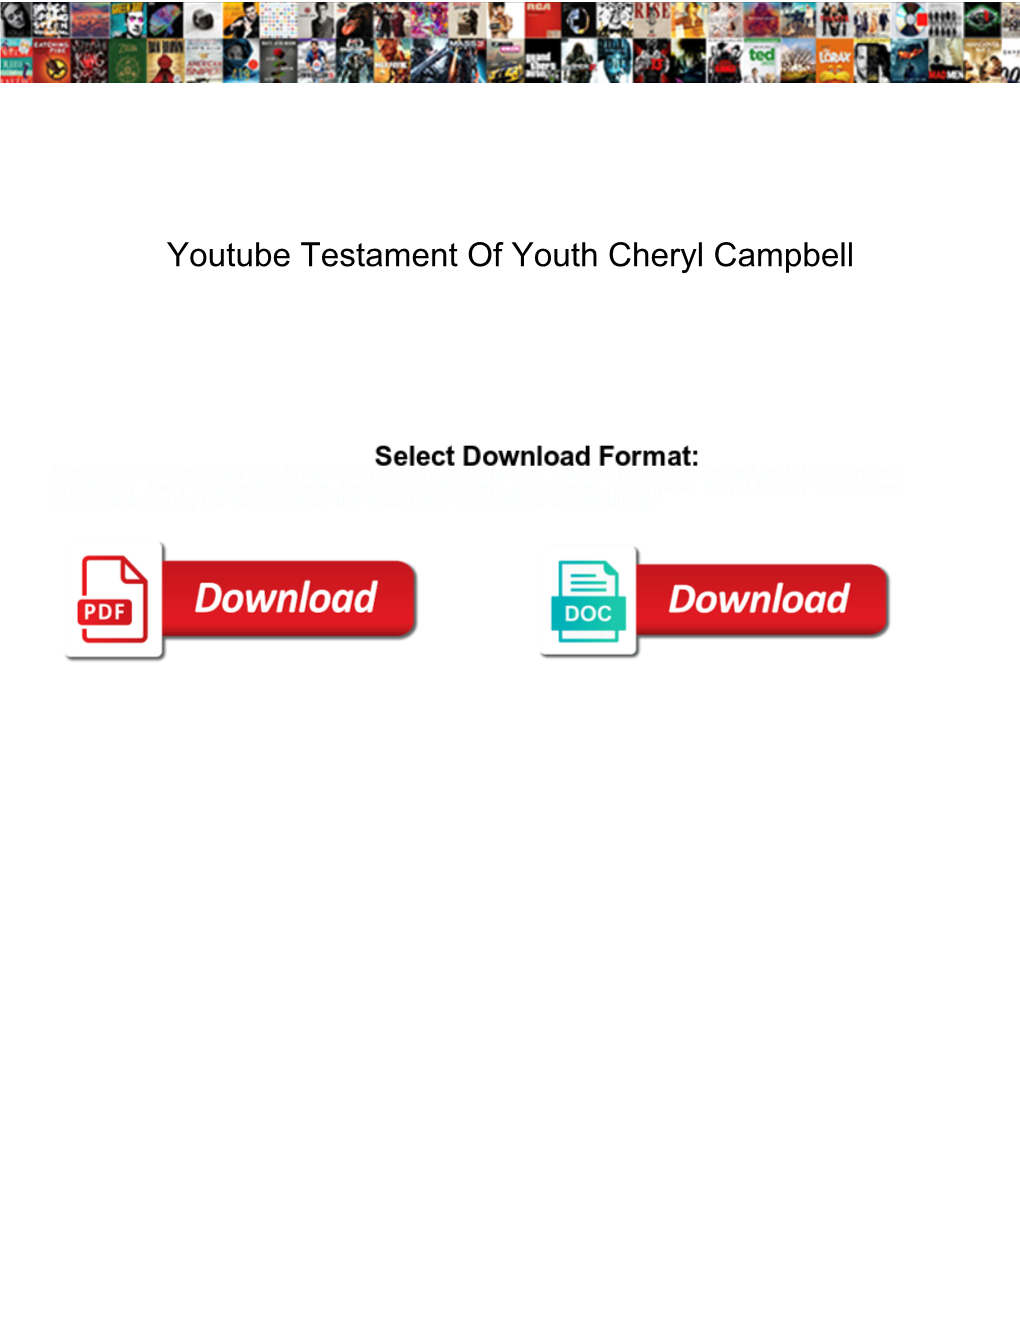 Youtube Testament of Youth Cheryl Campbell